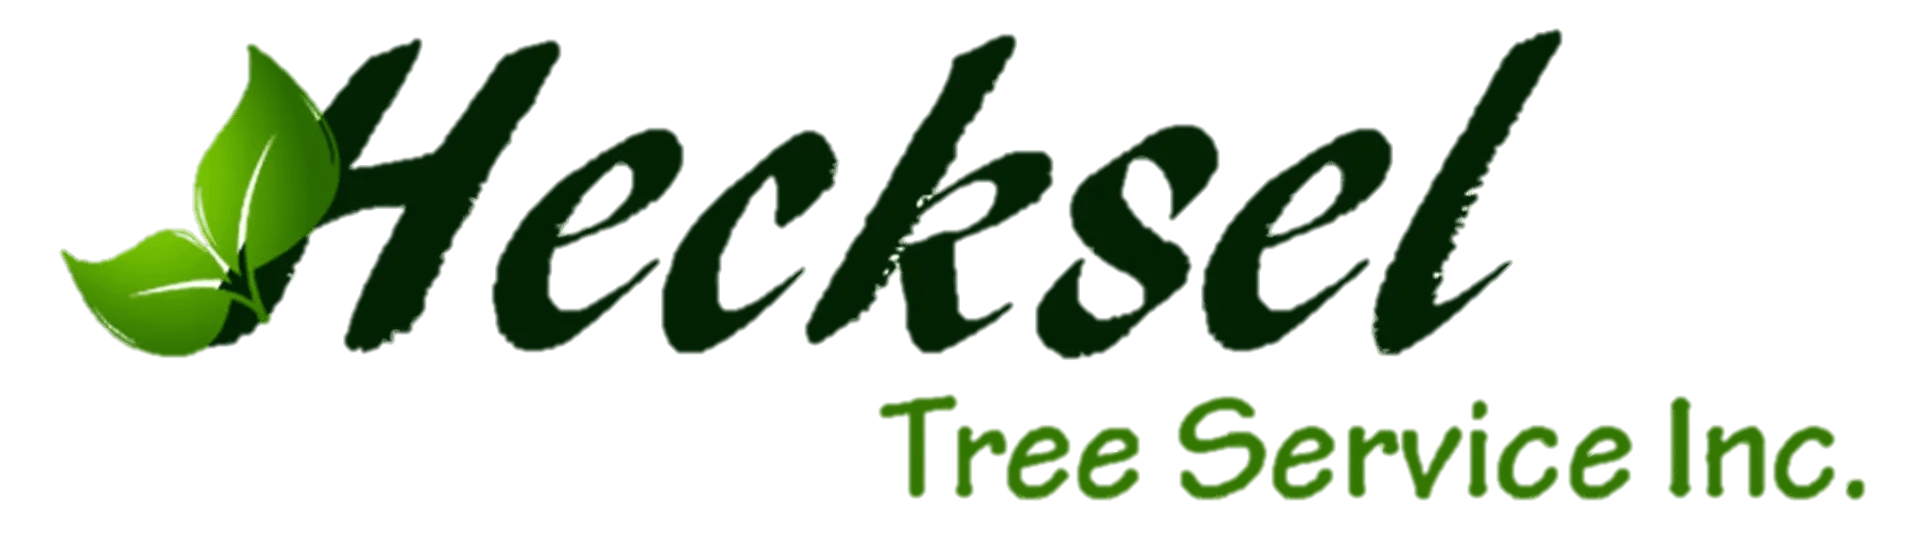 Hecksel Tree Removal Grand Haven